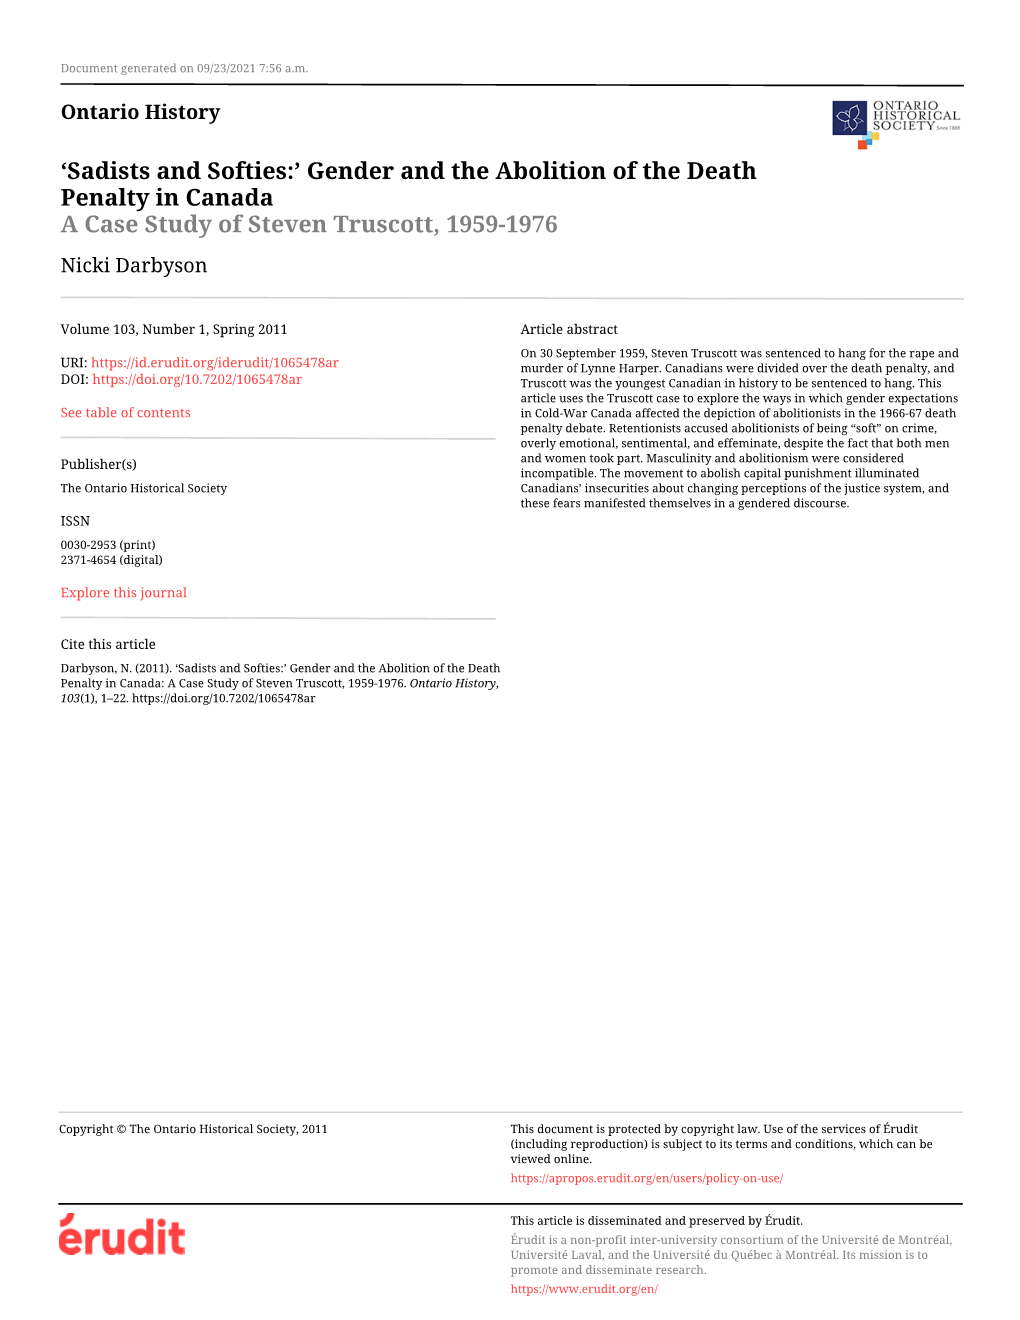 Gender and the Abolition of the Death Penalty in Canada a Case Study of Steven Truscott, 1959-1976 Nicki Darbyson